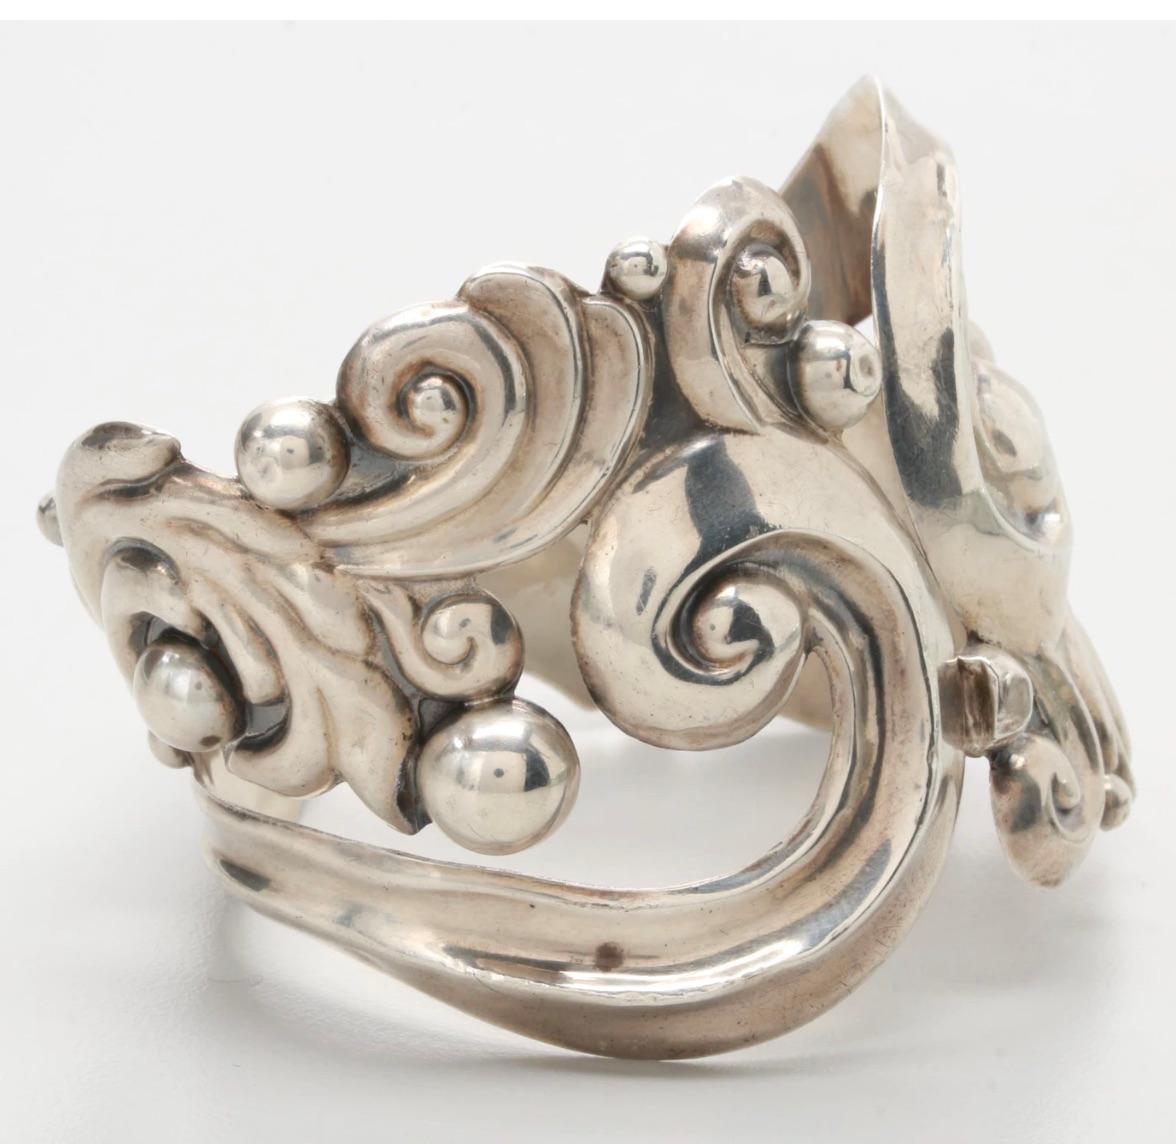 A rare 1950s vintage gorgeous Elaborate Design sterling silver
Mexico Clamper bracelet by a master artisan-Antonio Pineda
Clamper bracelet featuring flowing Repousse lines with ball accents swirling around the cuff; including an eagle stamp;